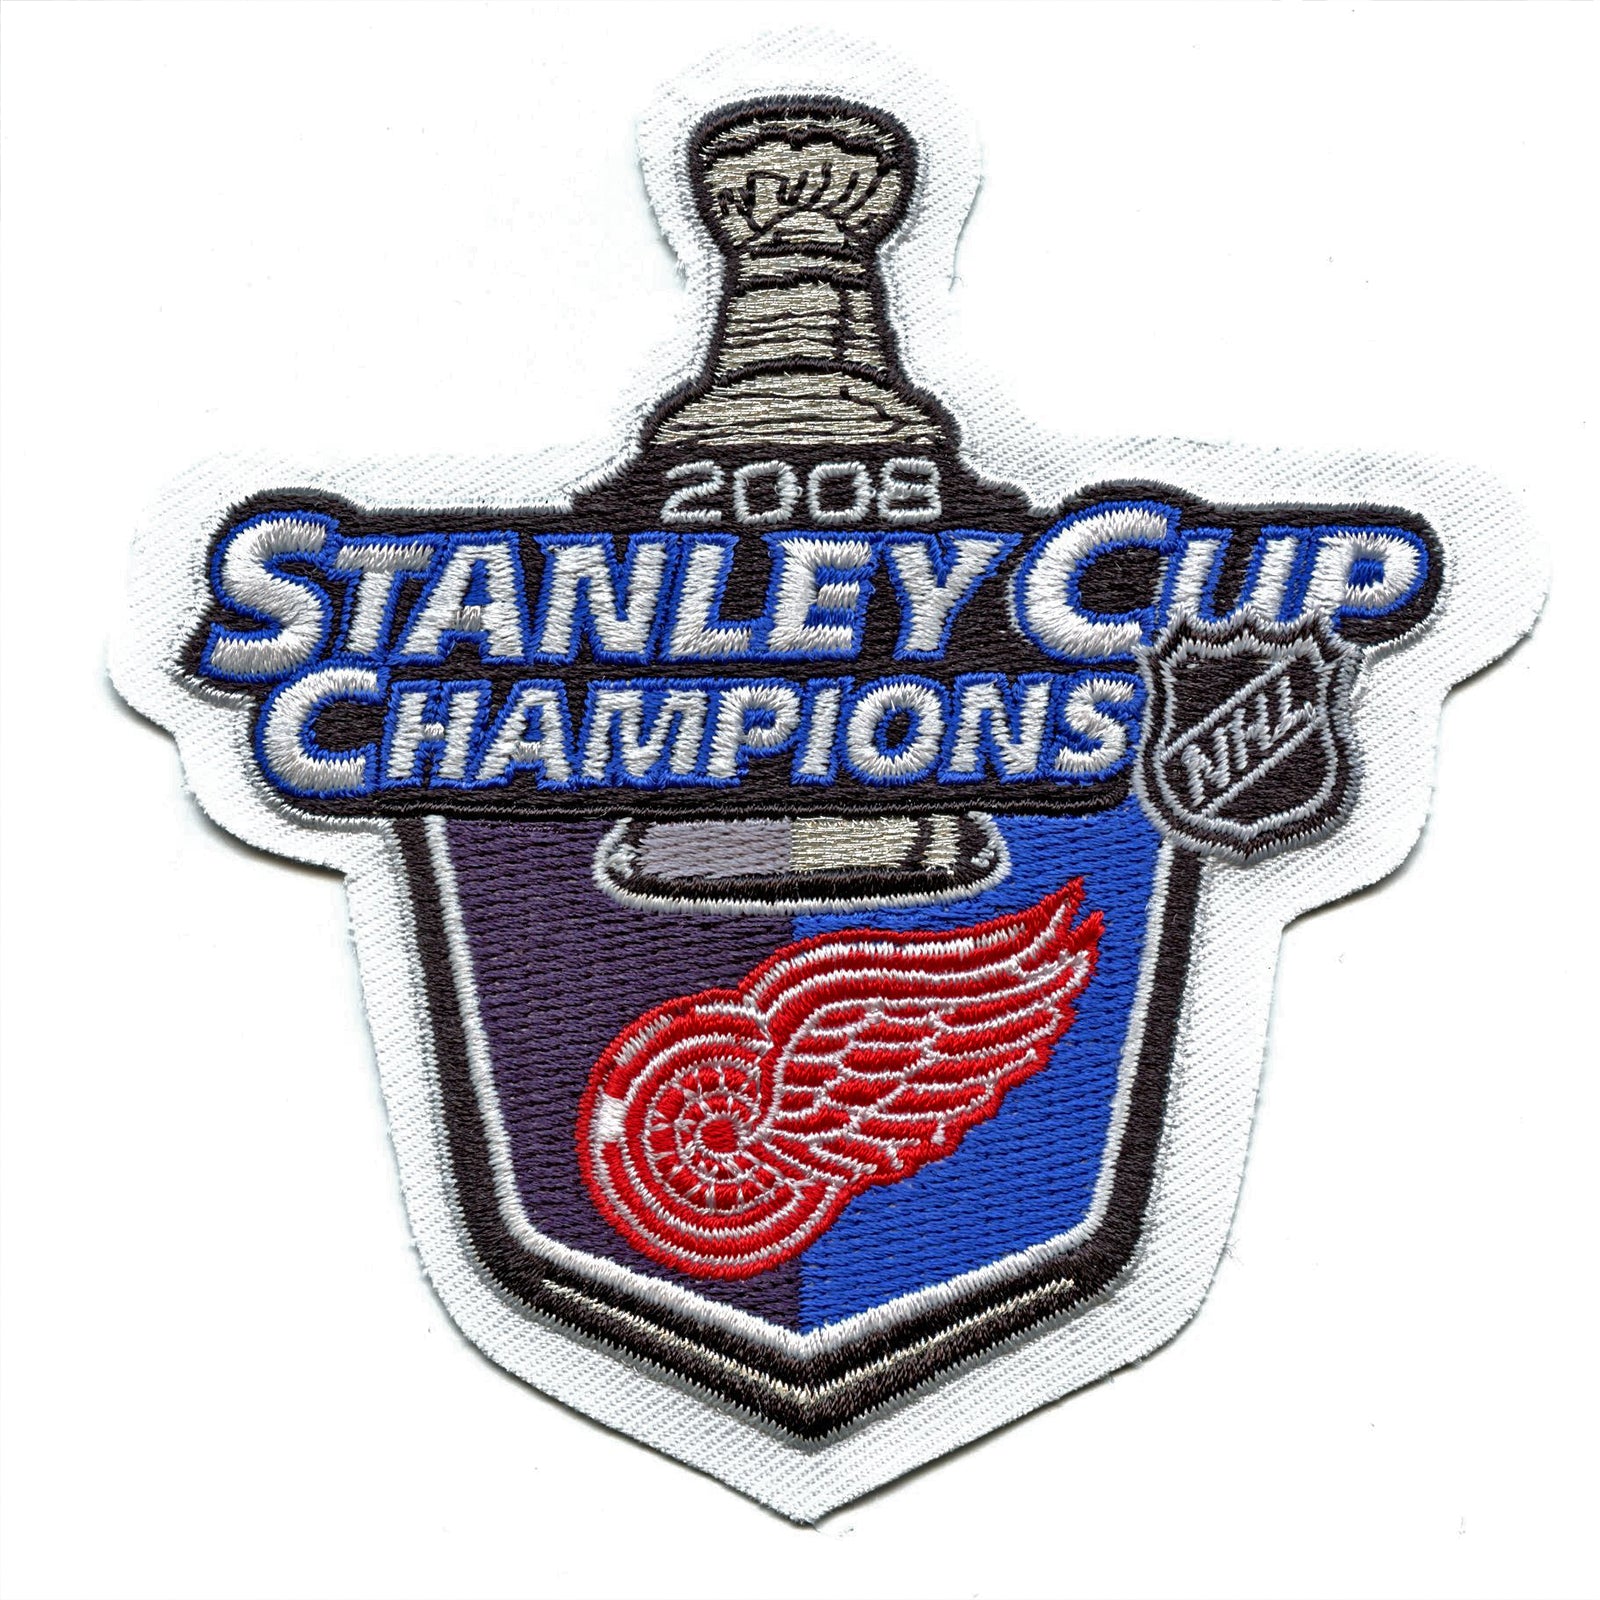 A Stanley Cup Champions patch is seen on the jersey of St. Louis